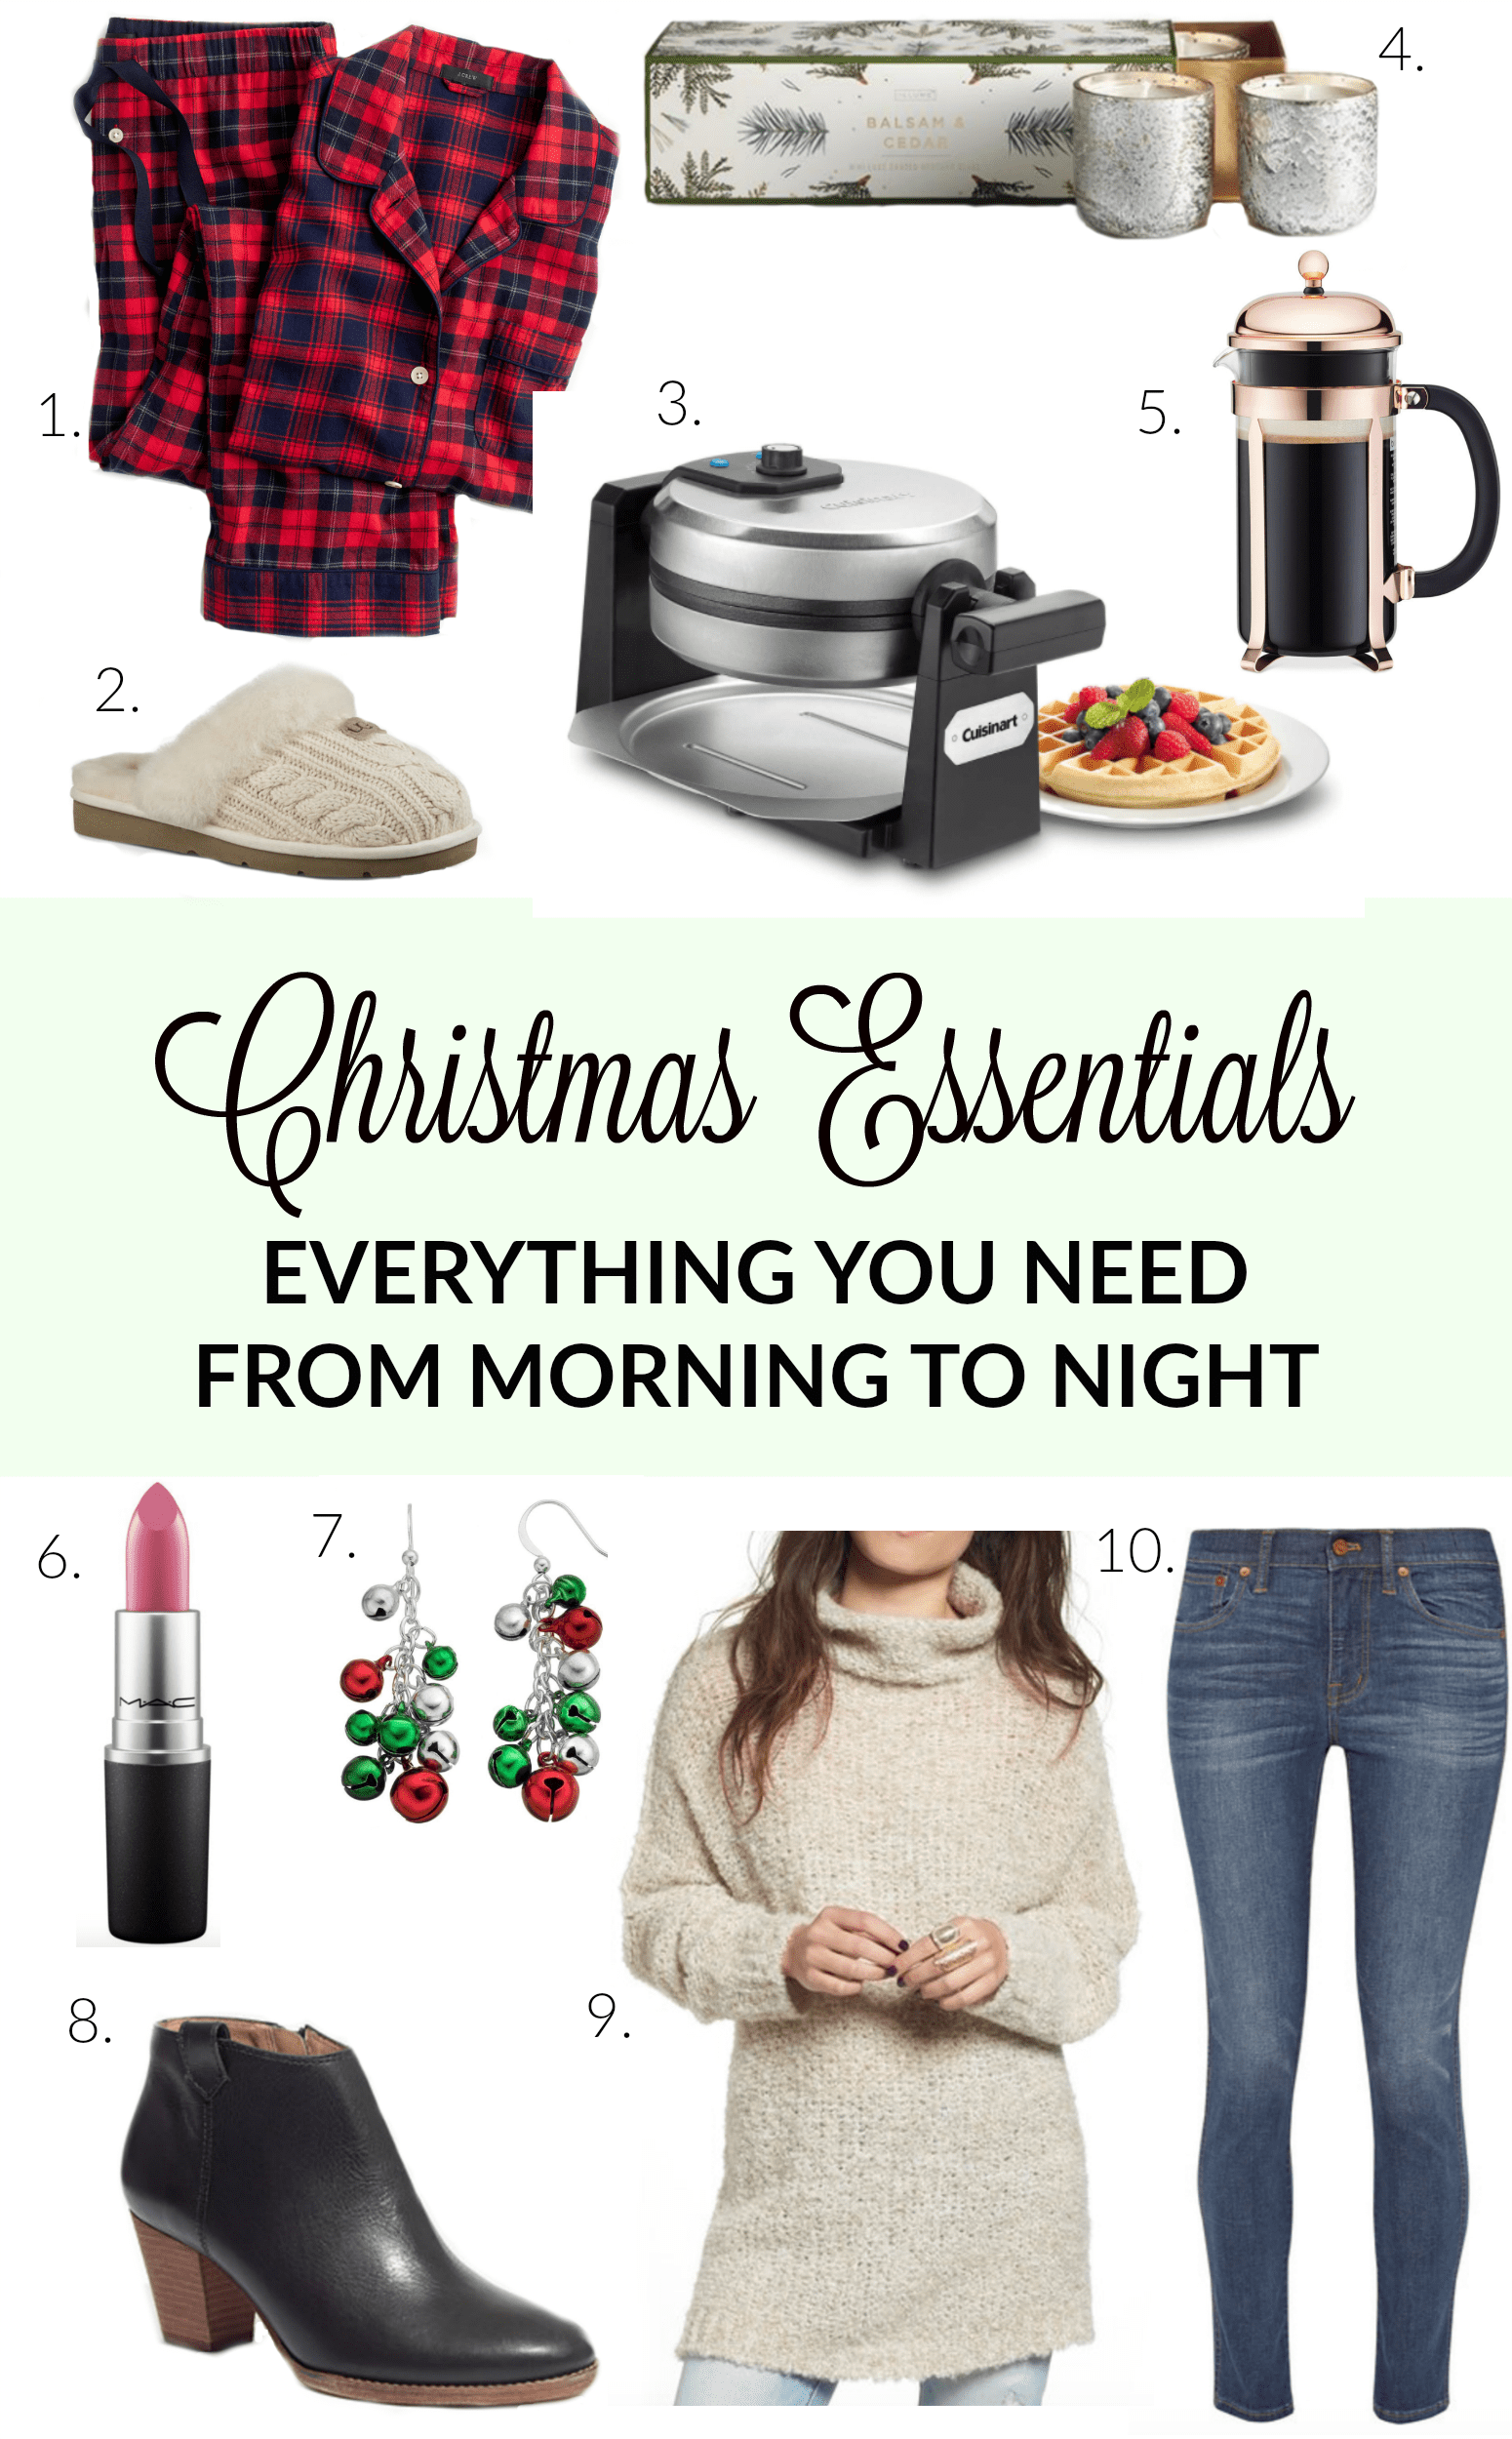 Christmas Essentials from Morning to Night